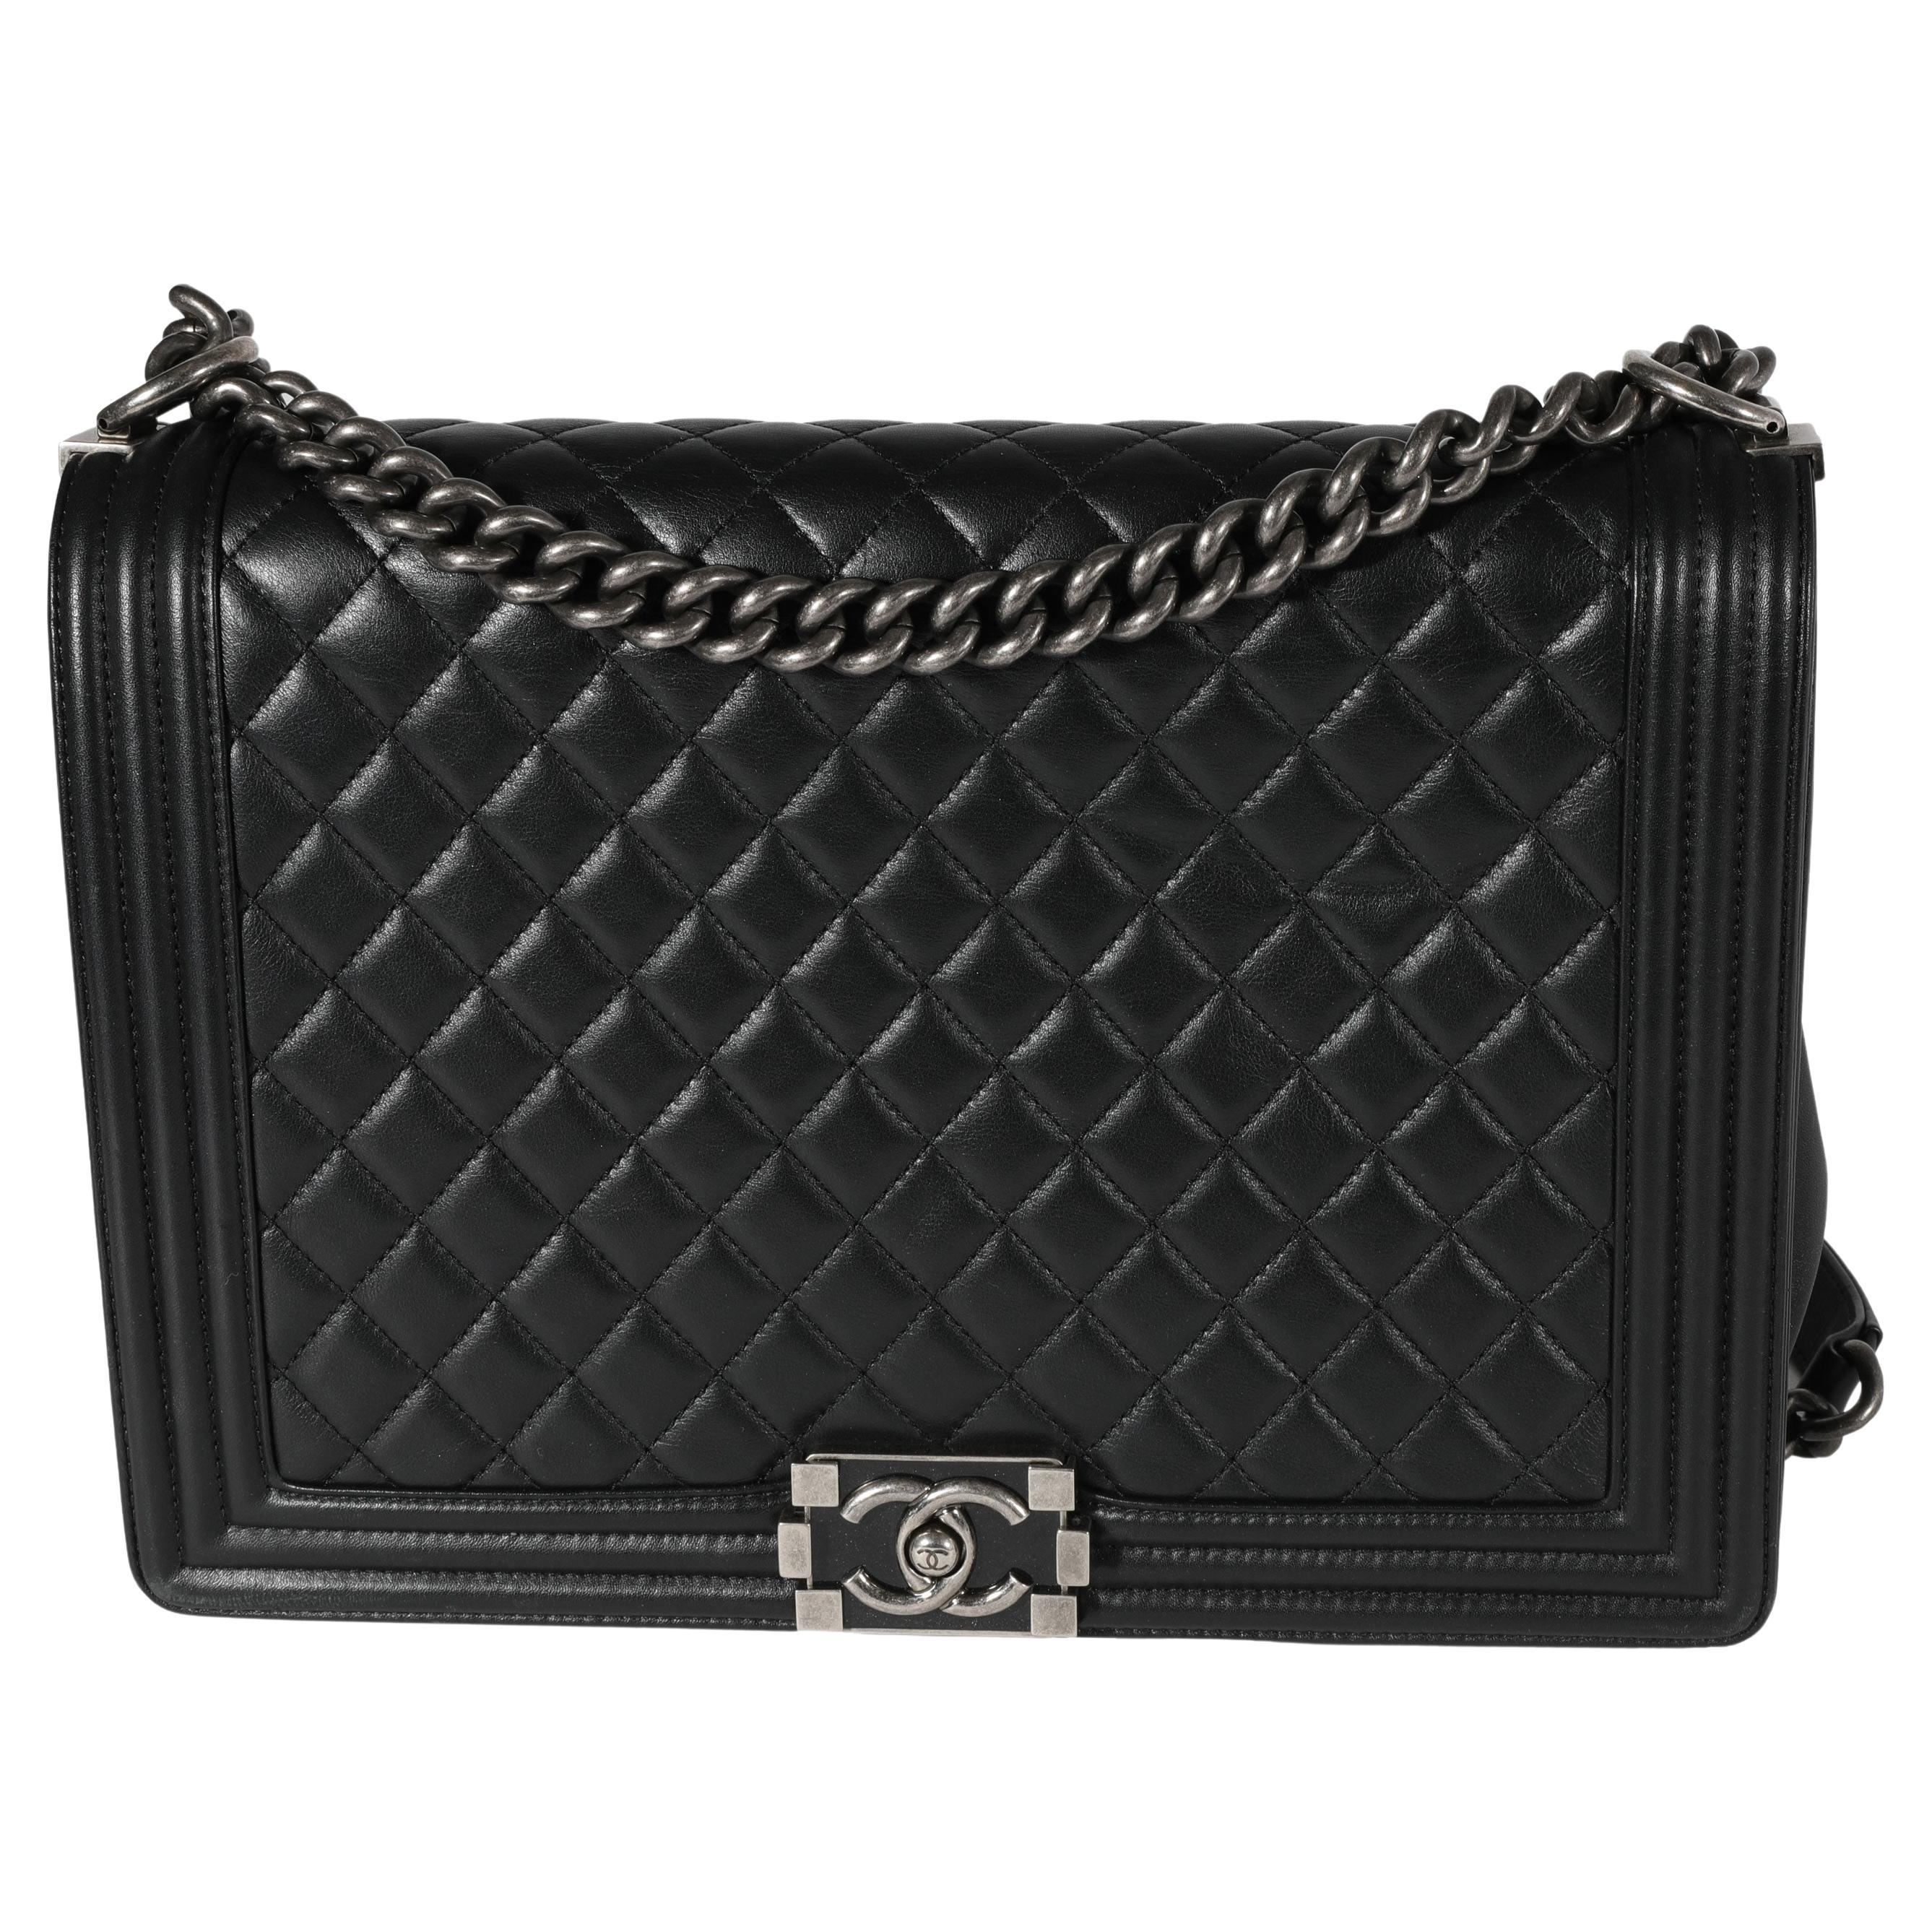 Chanel Black Quilted Lambskin Large Boy Bag